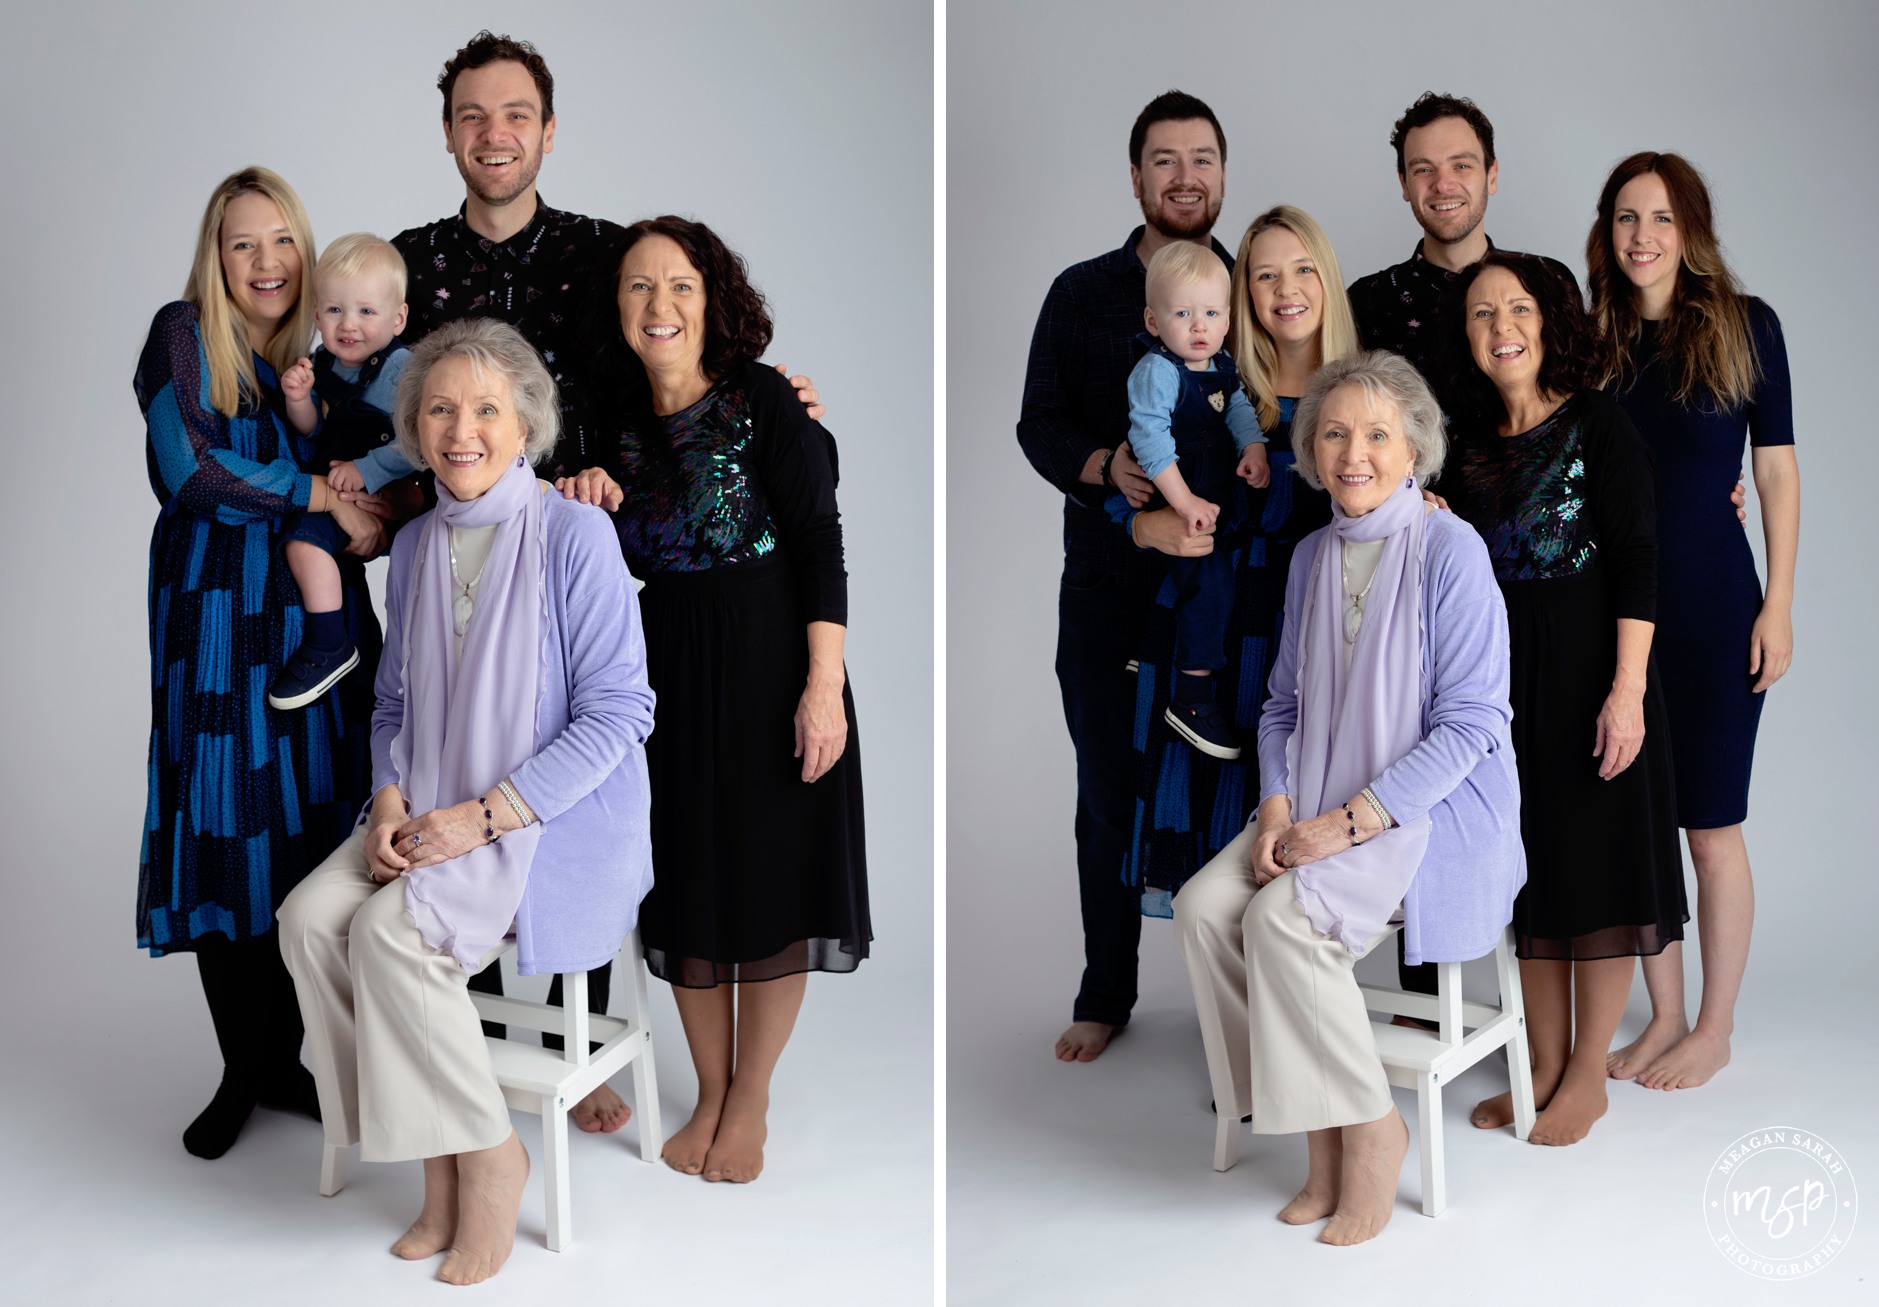 Portrait,Family,Group,Family of 7,Affordable photographer leeds,Fun Photos,Horsforth,Leeds,Little Ones,Meagan Sarah Photography,Photographs,Pictures,Professional Photographer in Leeds,Studio,White background,West Yorkshire Photographer,